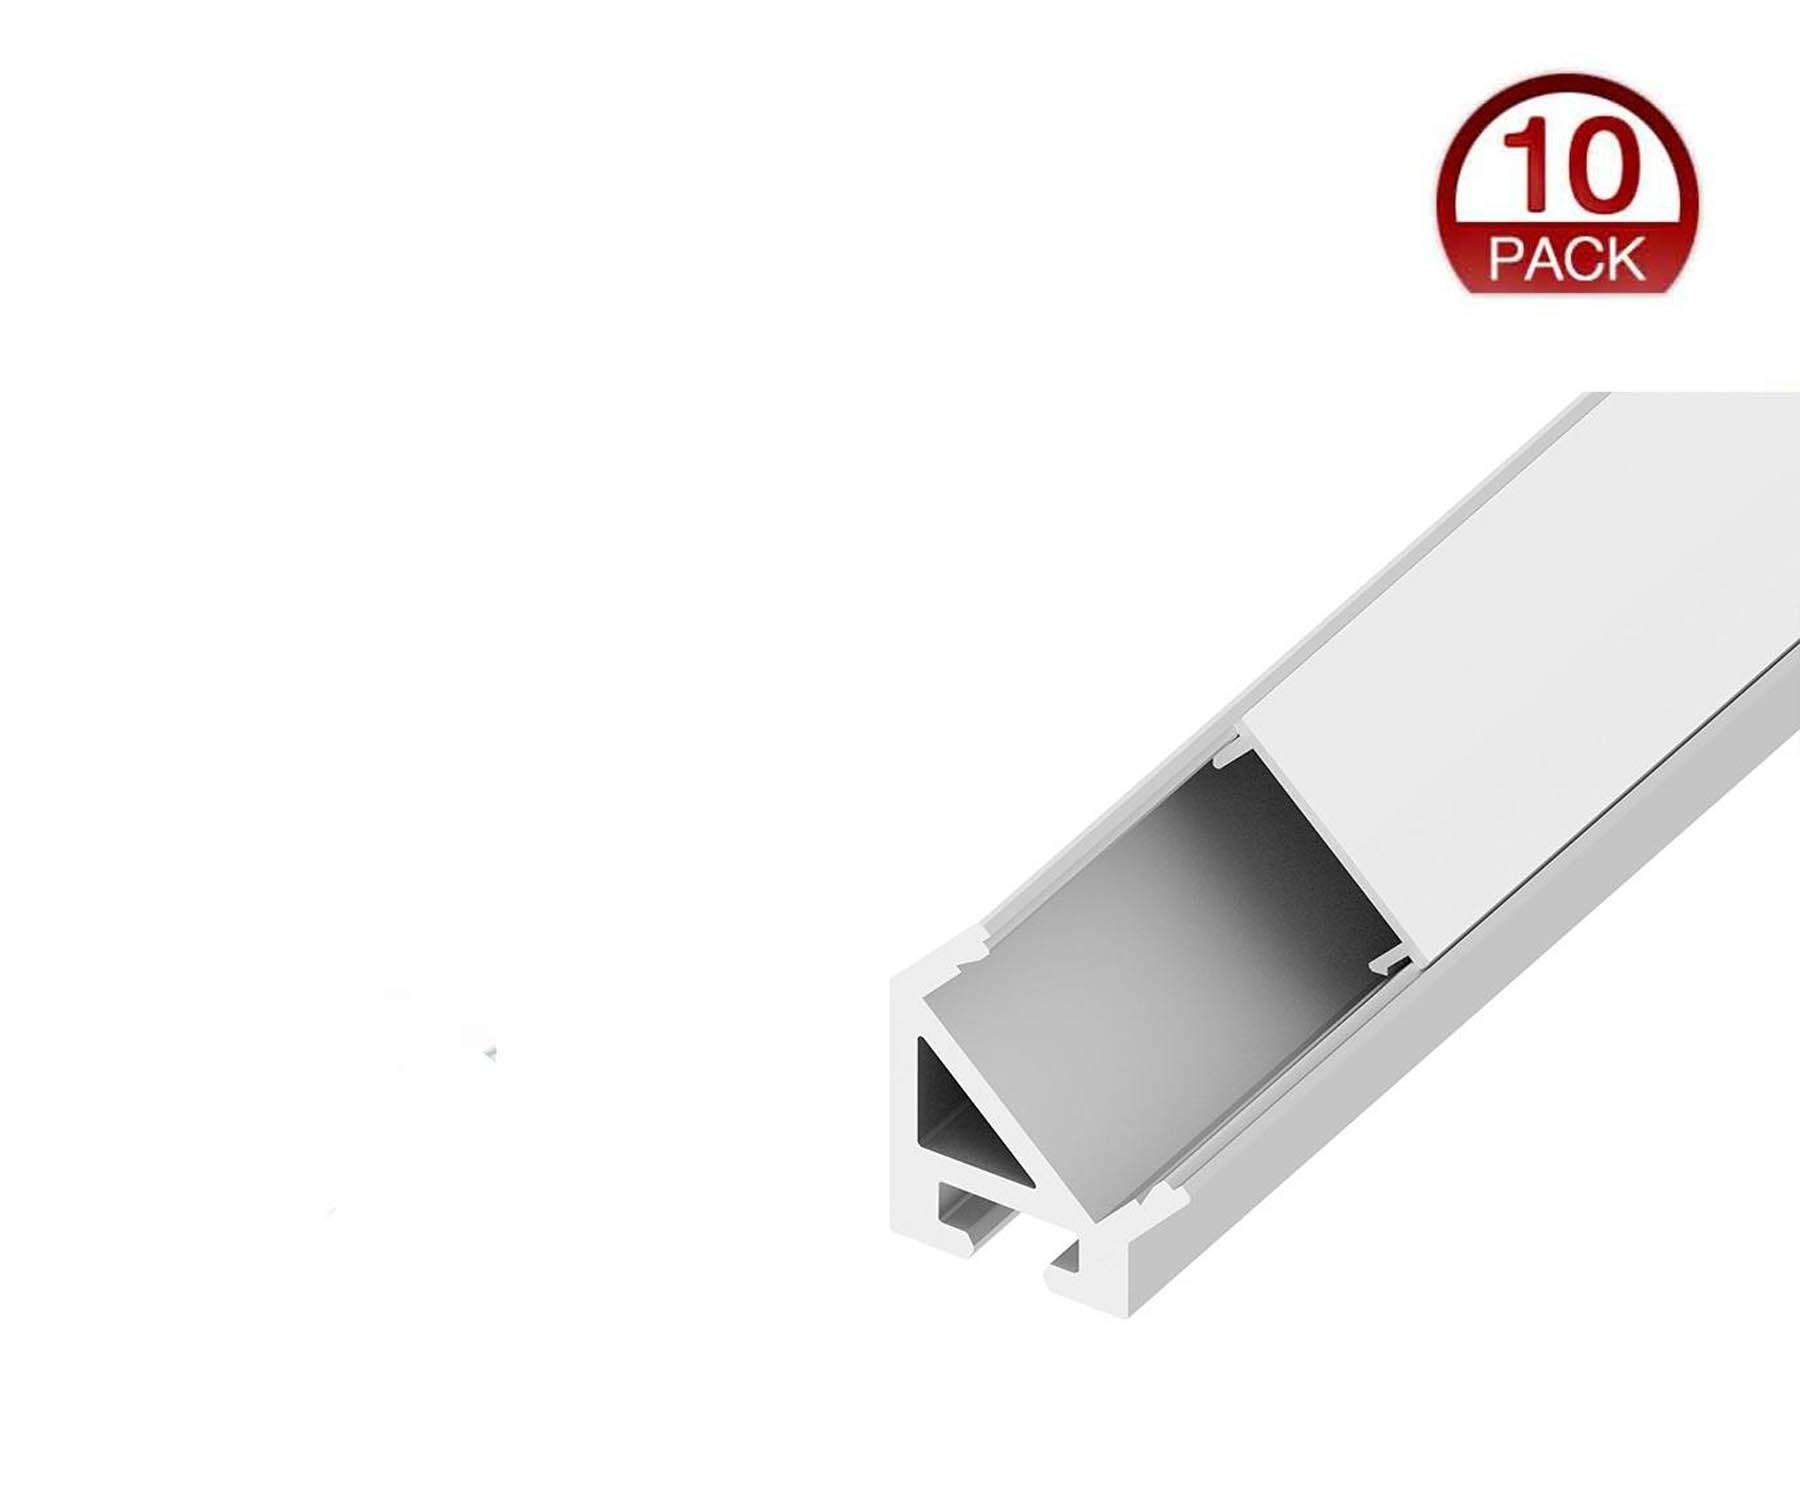 96in. Chromapath Builder, 45 degree LED channel, Corner, for Strips Up To 12mm, White, Pack of 10